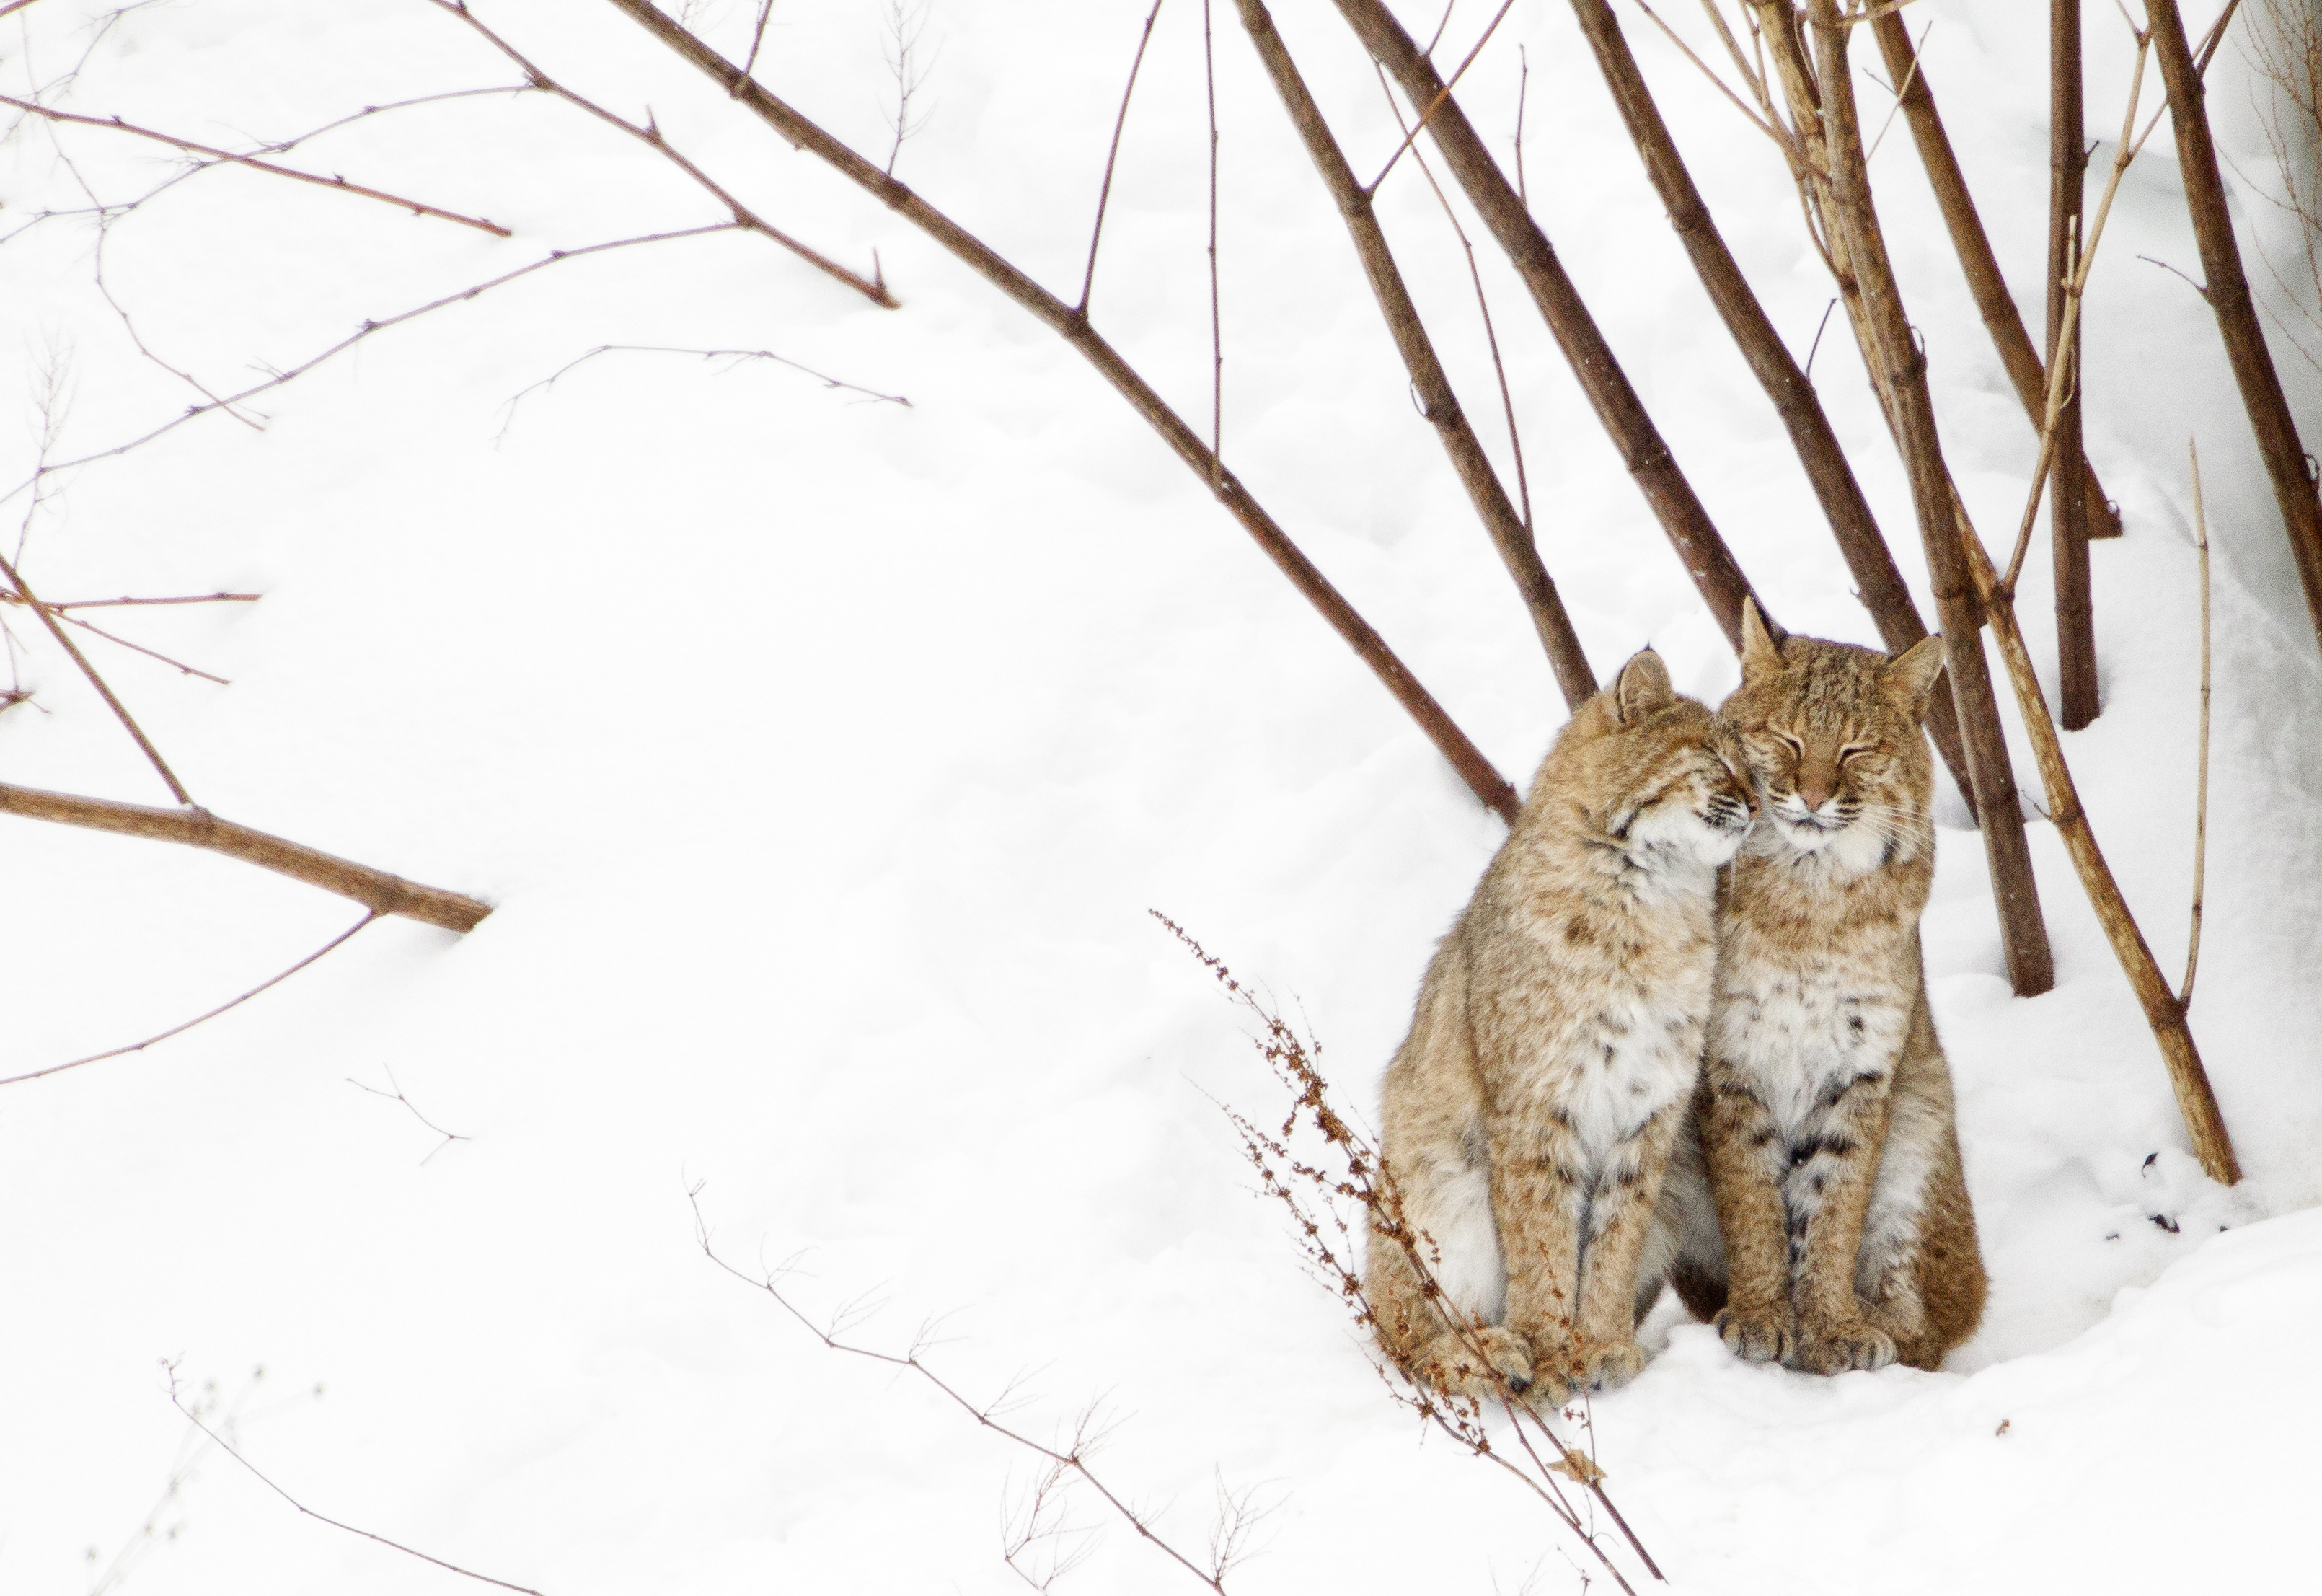 Two nuzzling bobcats in snow.